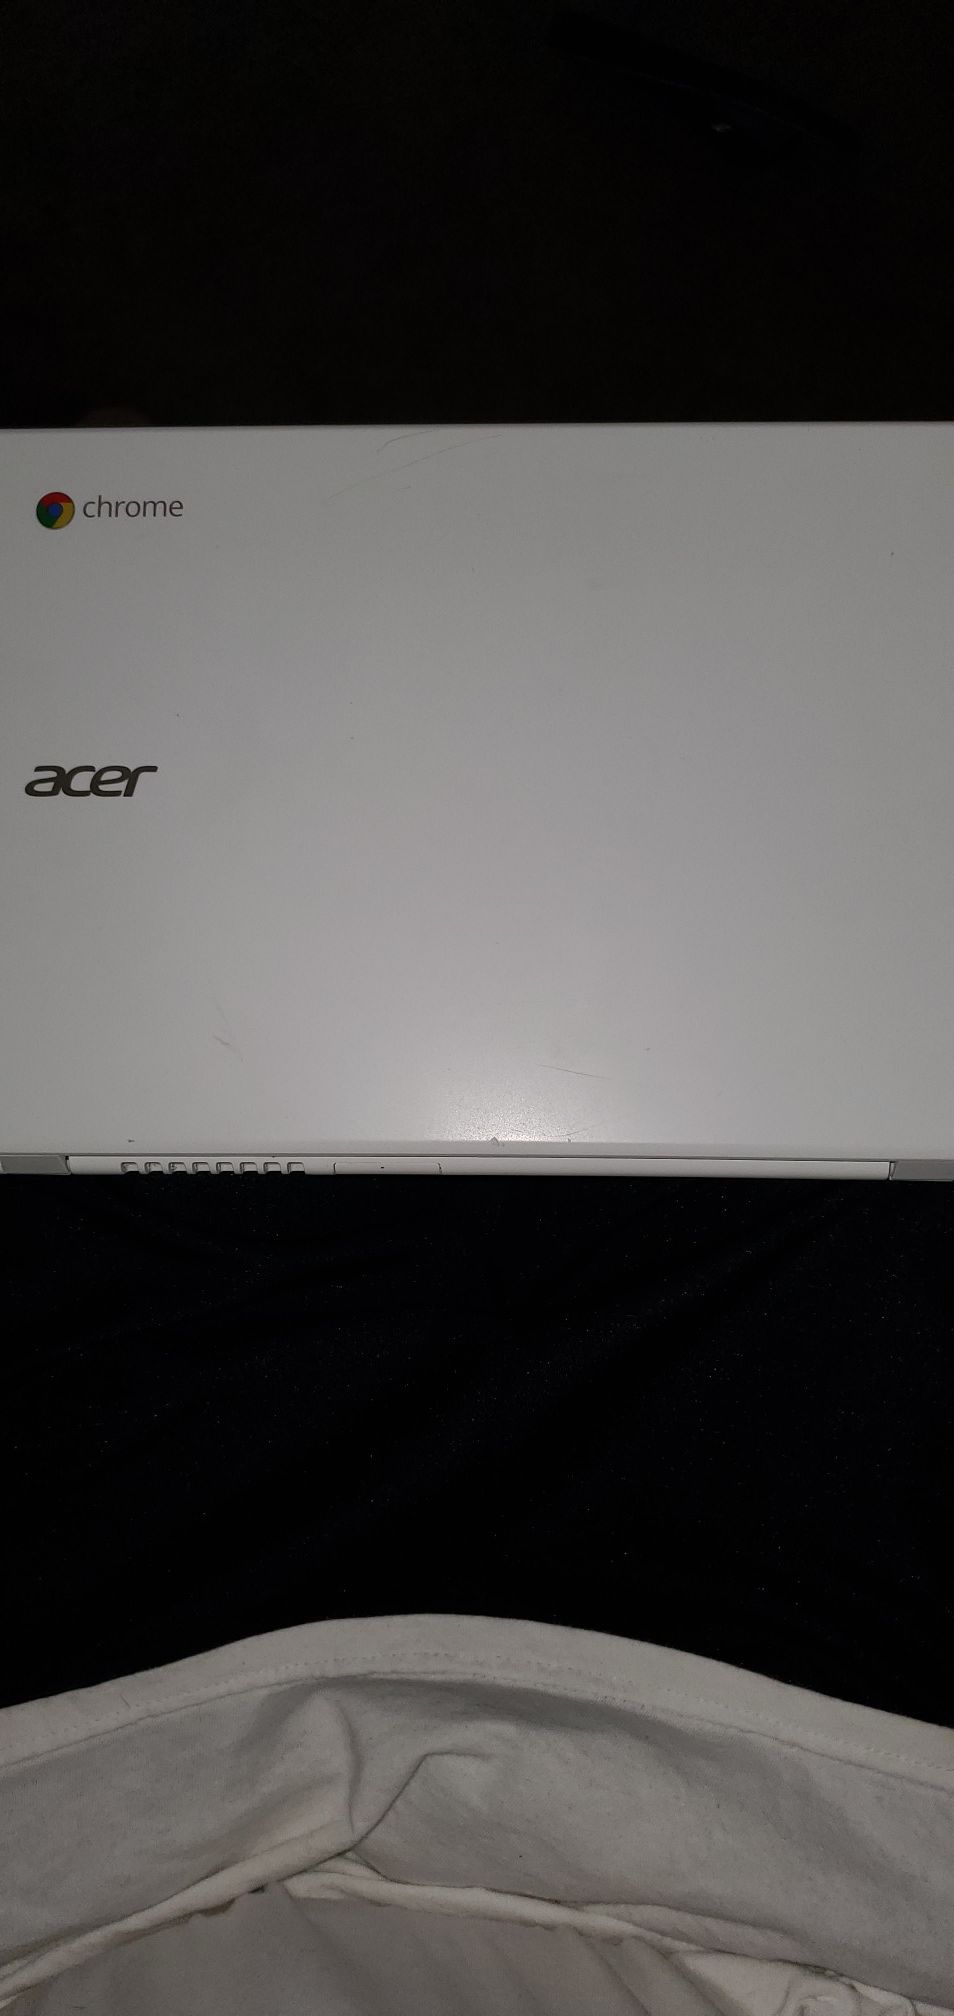 Acer ChromeBook, Touchscreen, Very Nice